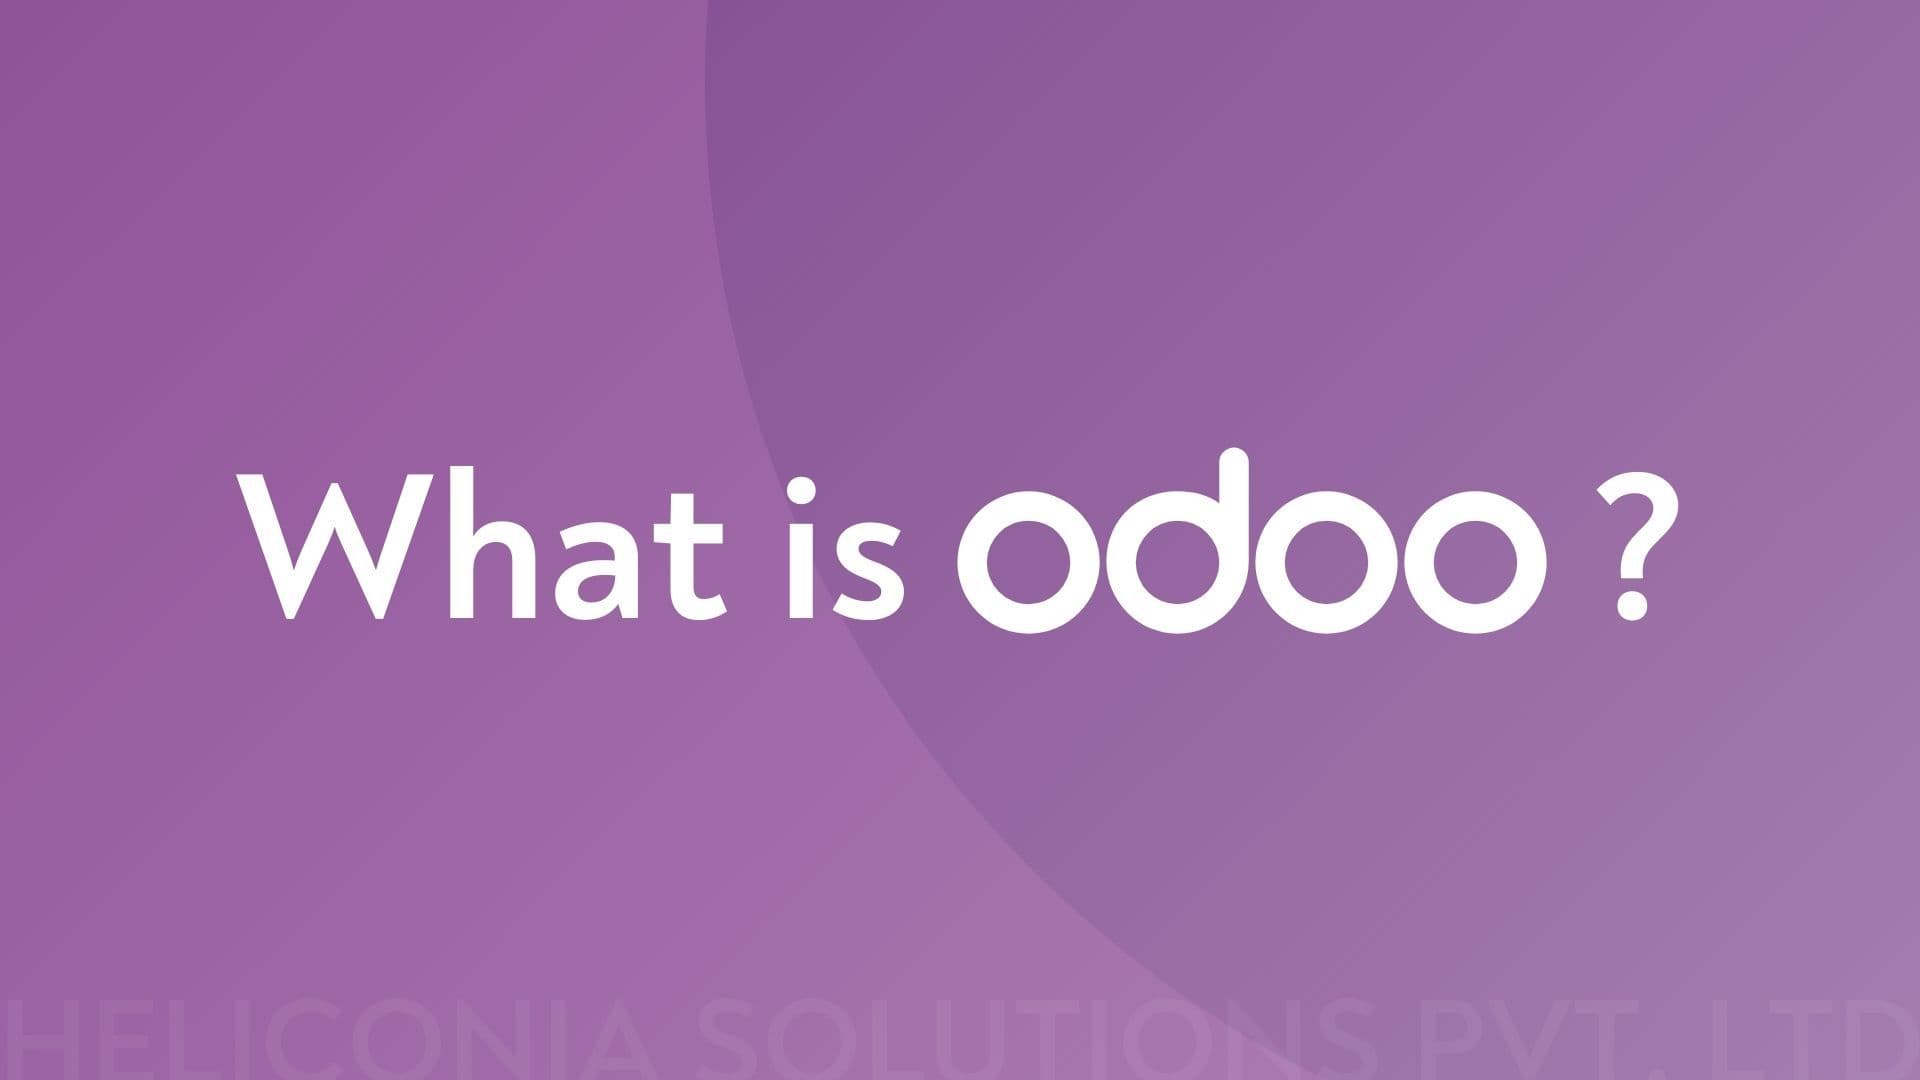 Odoo: All-in-One Business Management Software Simplified